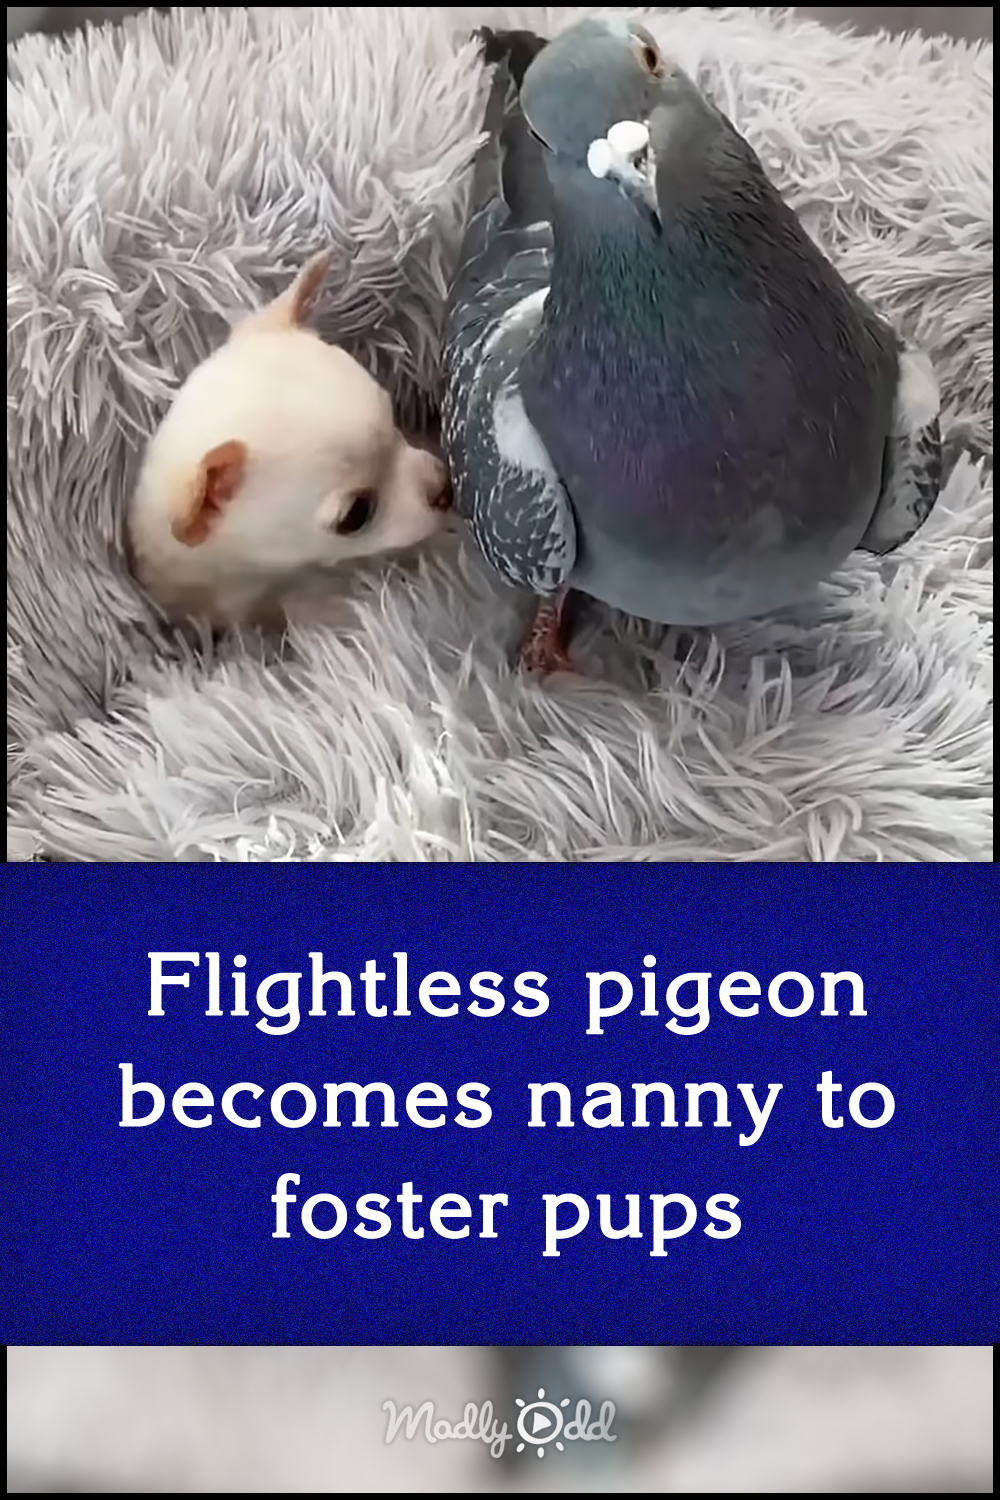 Flightless pigeon becomes nanny to foster pups